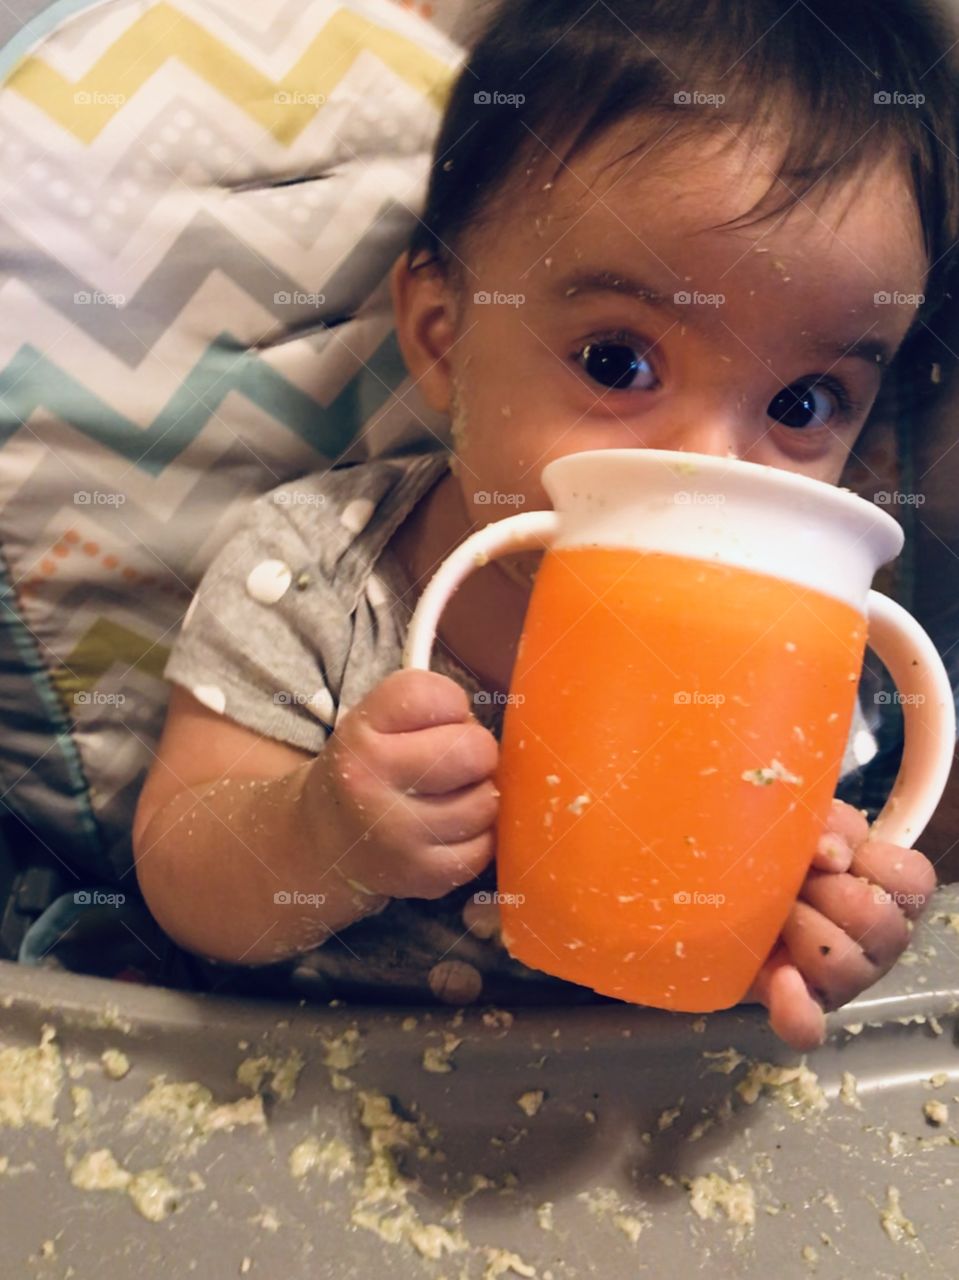  Baby learning to eat and drink